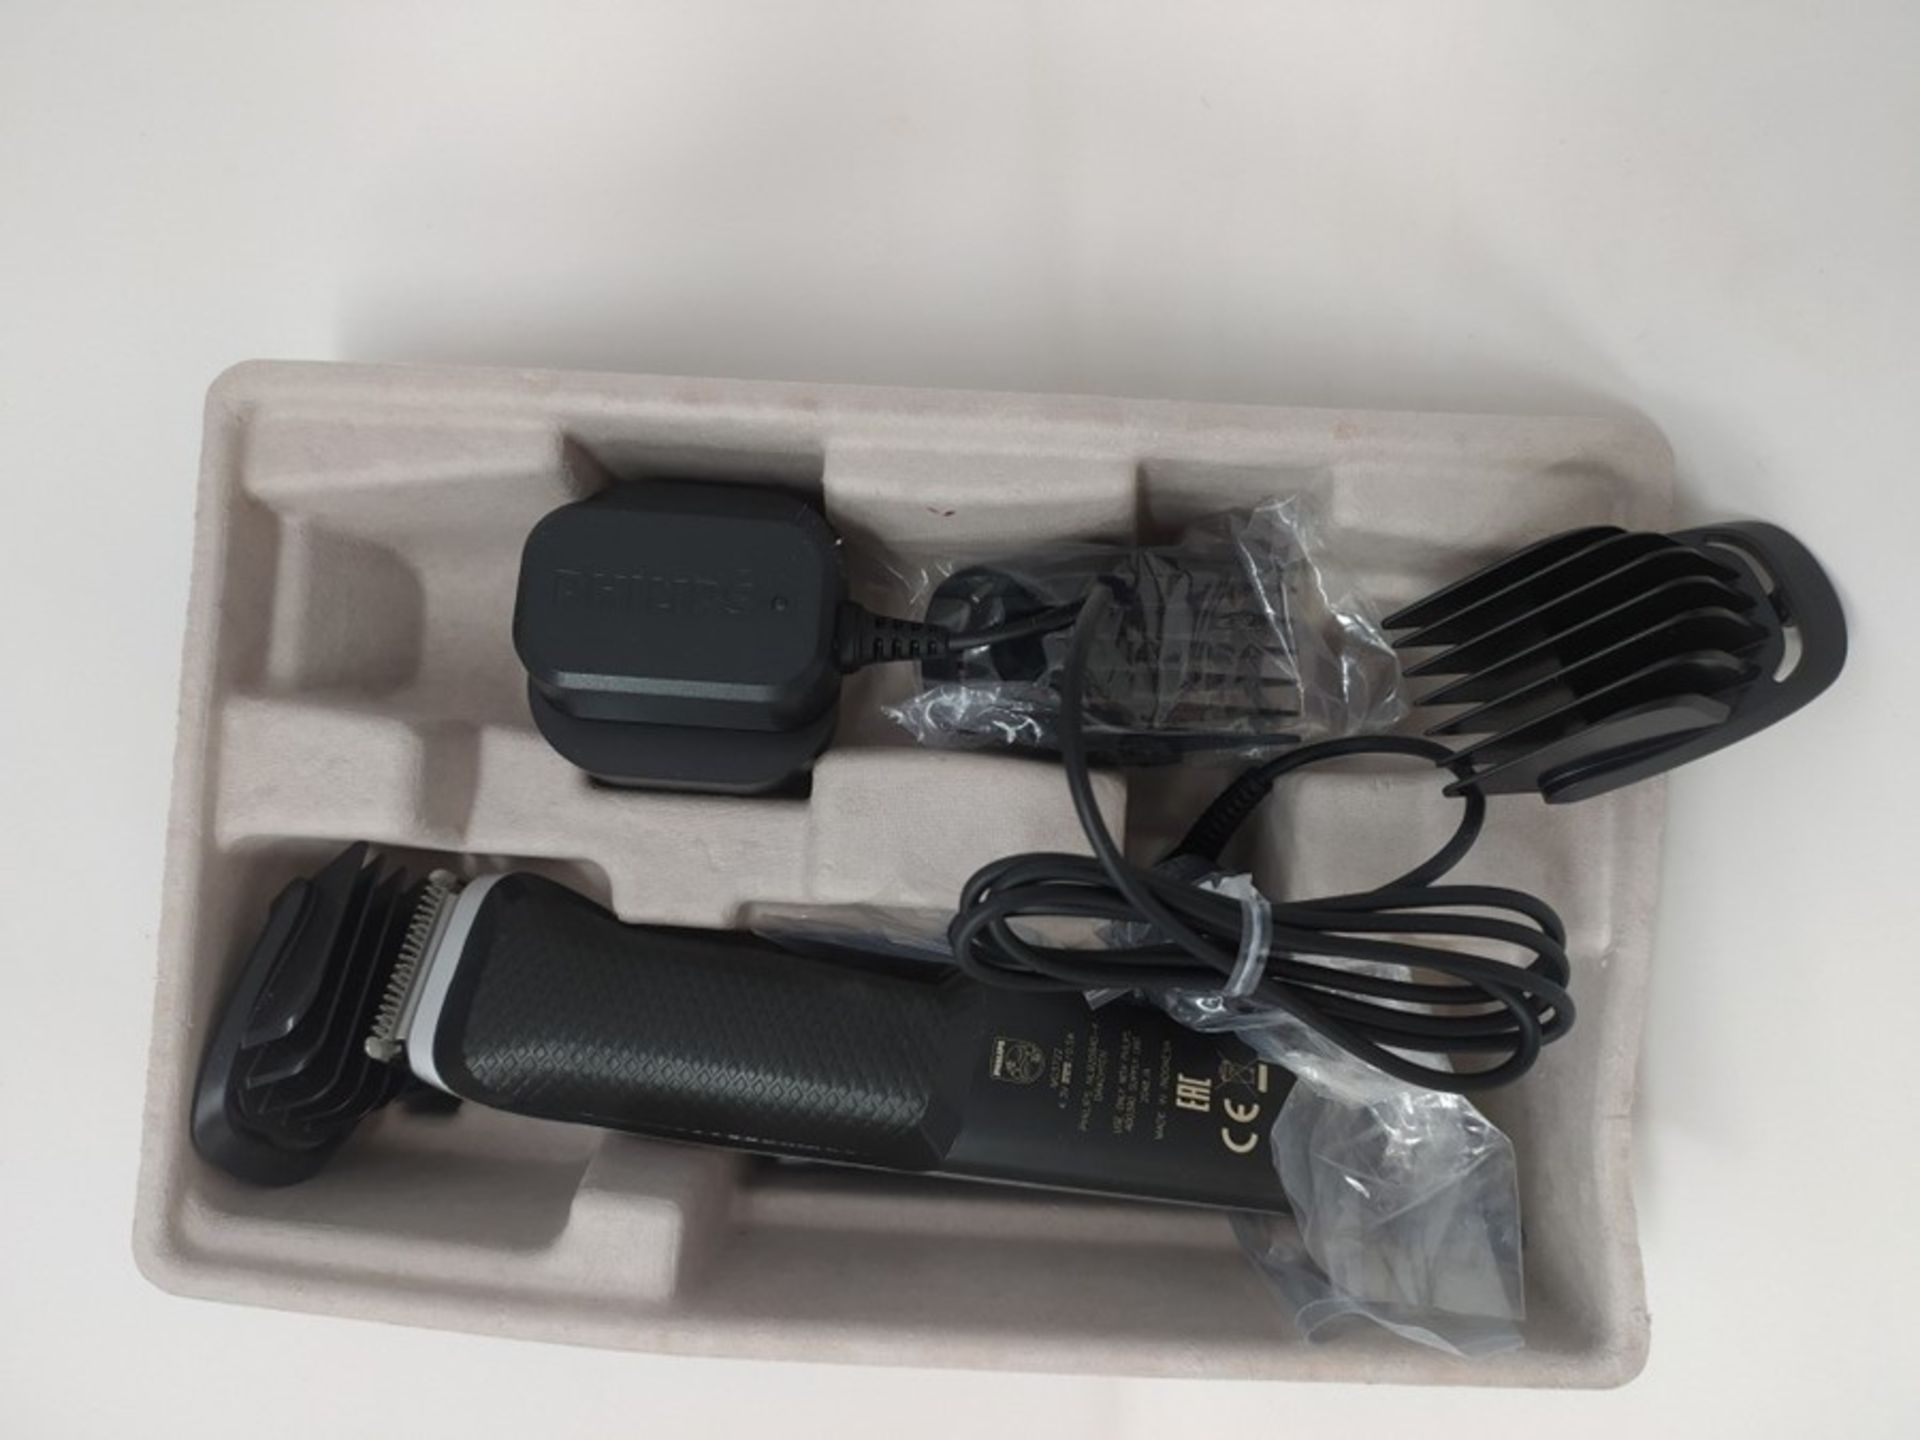 Philips 9-in-1 All-In-One Trimmer, Series 3000 Grooming Kit, Beard Trimmer and Hair Cl - Image 2 of 2